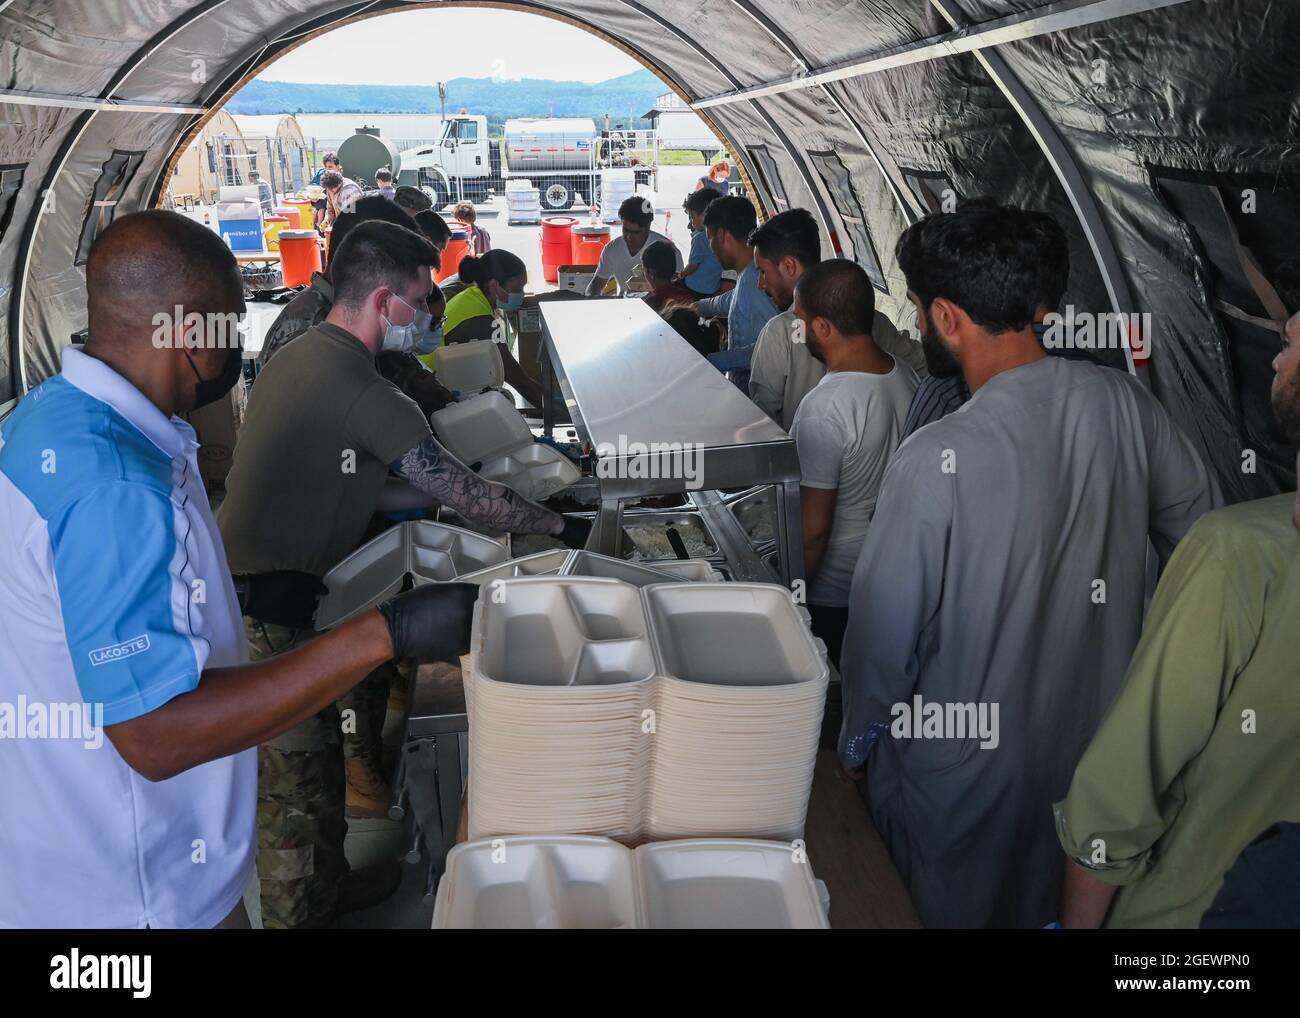 Ramstein Miesenbach, Germany. 21st Aug, 2021. U.S. Air Force airmen prepare  meals for Afghan refugees evacuated from Kabul after arrival at Ramstein  Air Base August 21, 2021 in Ramstein-Miesenbach, Germany. Ramstein Air